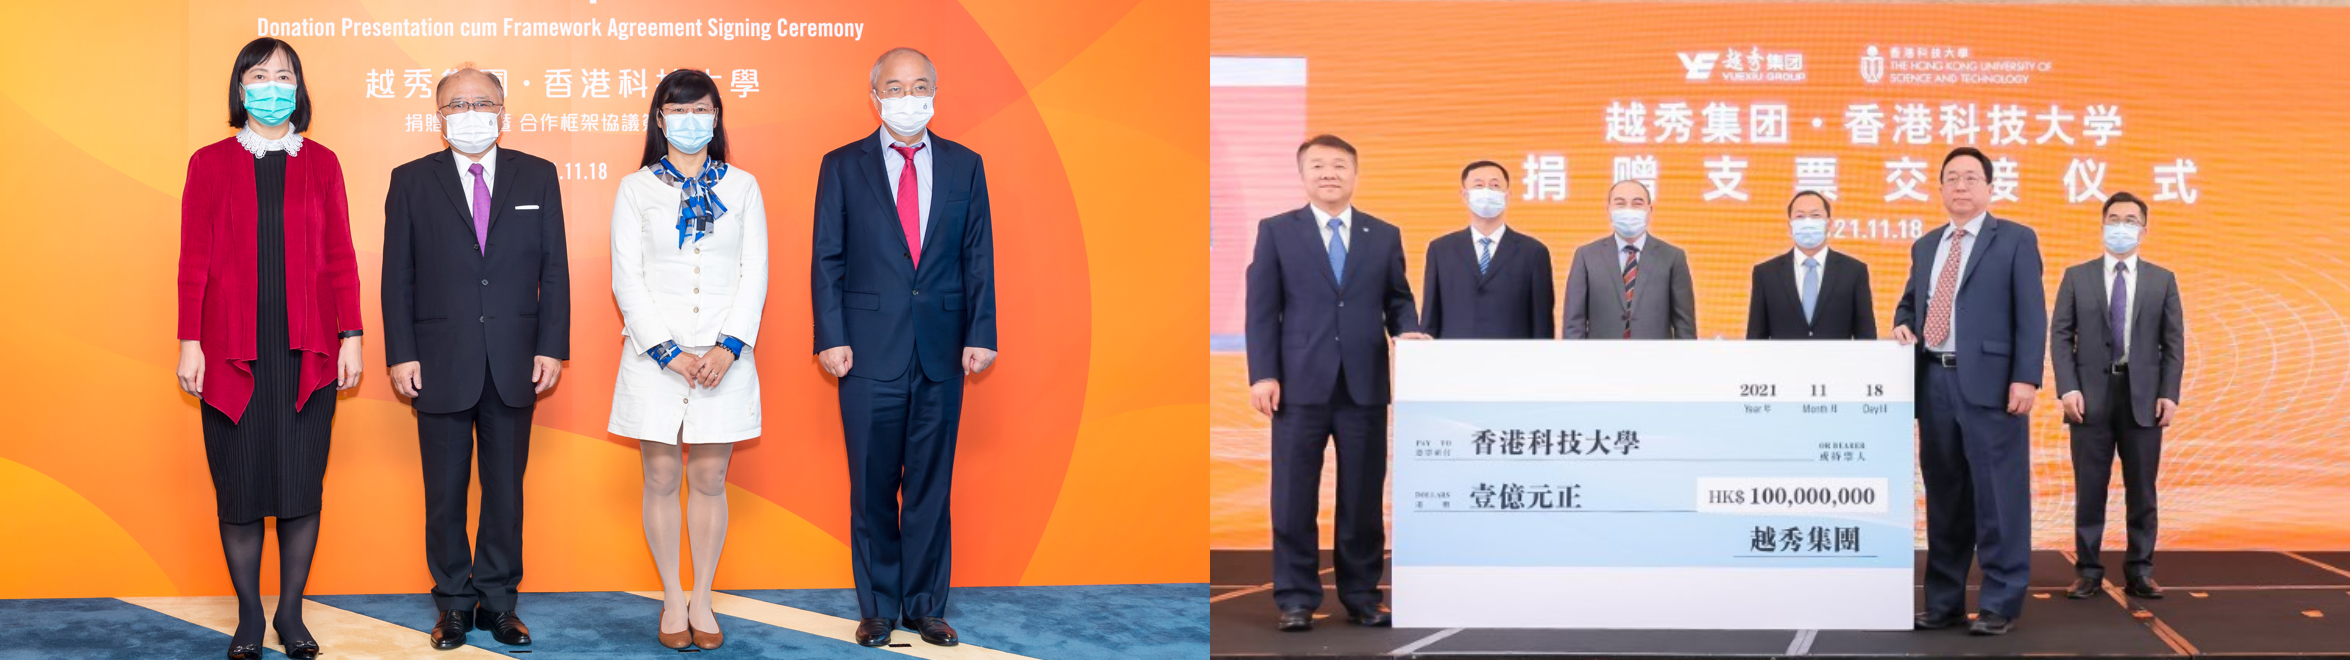 (Left photo) (From left) Ms. Michelle LI Mei-Sheung, Permanent Secretary for Education, HKSAR; Mr. Andrew LIAO Cheung-Sing, HKUST Council Chairman; Ms. YE Liping, Deputy Director-General of the Economic Affairs Department of The Liaison Office of the Central People's Government in HKSAR and Prof. WANG Yang, HKUST Vice-President for Institutional Advancement, witness the cheque presentation ceremony in Hong Kong.   (Right photo) Prof. Lionel NI Ming-Shuan, President of HKUST(GZ) (second right) accepts the cheque on behalf of HKUST from Mr. ZHANG Zhaoxing, Chairman of Yuexiu (first left), under the witness of Mr. LU Yixian, Municipal Committee Member of Guangzhou and Party Secretary of Nansha District (fourth left); Mr. GU Zhongpeng, Deputy Director of Guangzhou Education Bureau (second right); Mr. CUI Yanlun, Deputy Director of State-owned Assets Supervision and Administration Commission of Guangzhou Municipal Government (third left) and Mr. LI Hongqing, Deputy Inspector of the Guangzhou Municipal Science and Technology Bureau (second left).